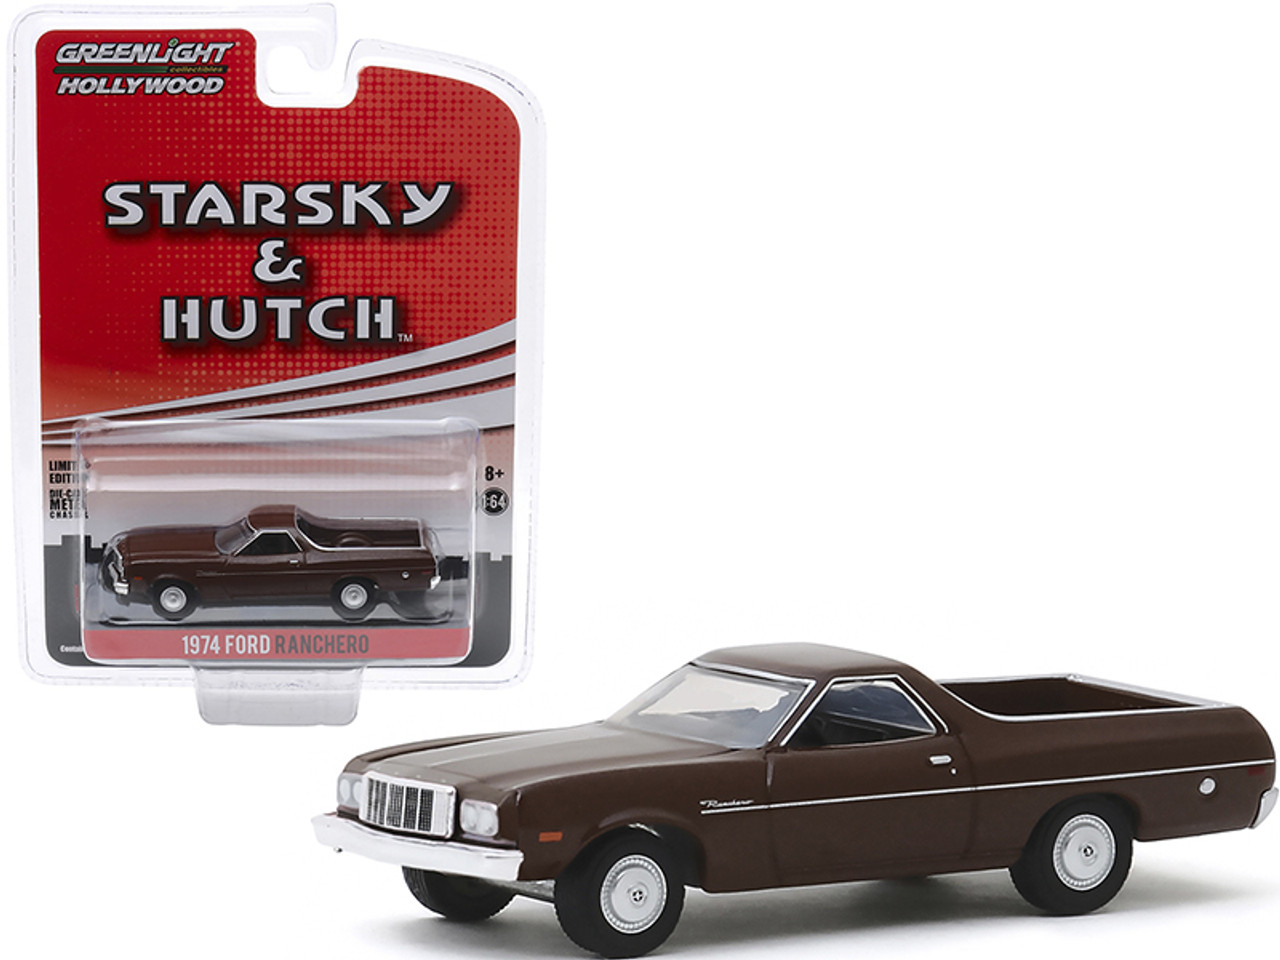 1974 Ford Ranchero Brown "Starsky and Hutch" (1975-1979) TV Series "Hollywood Special Edition" 1/64 Diecast Model Car by Greenlight